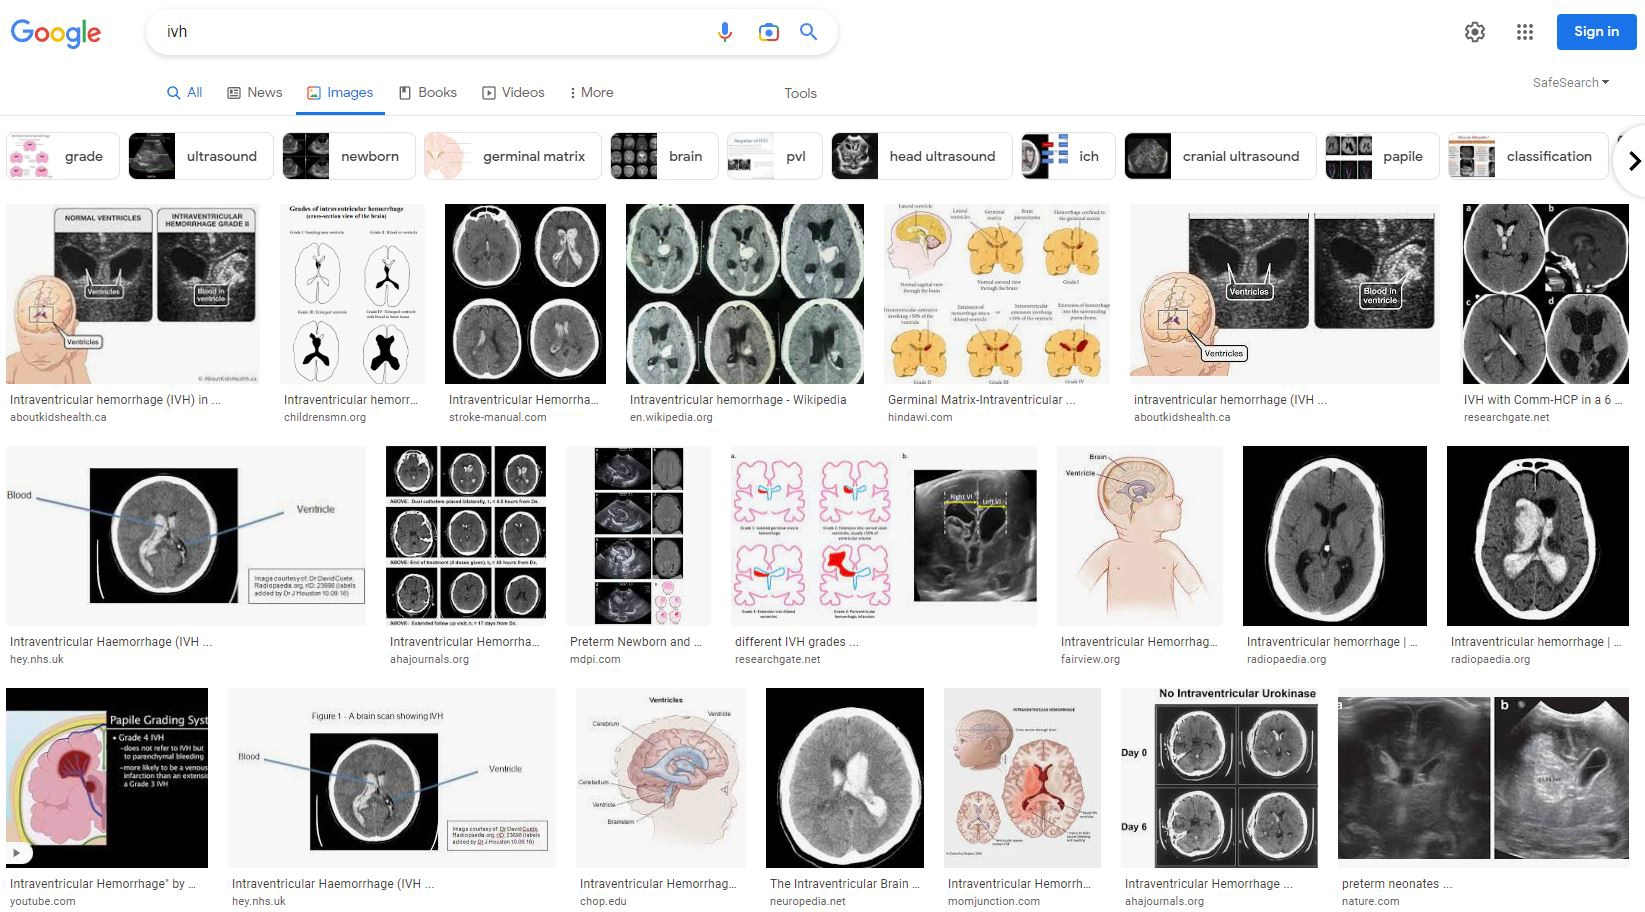 Screen capture of a Google image search on &ldquo;IVH&rdquo;